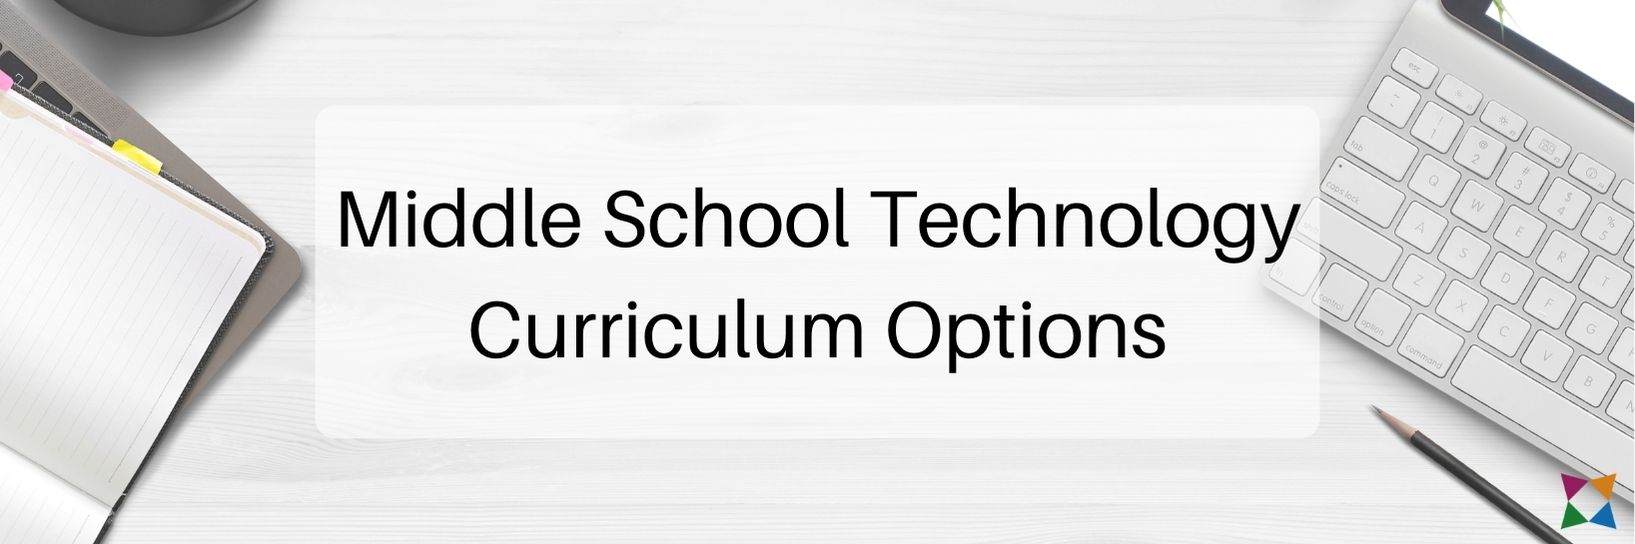 5 Top Middle School Technology Curriculum Options